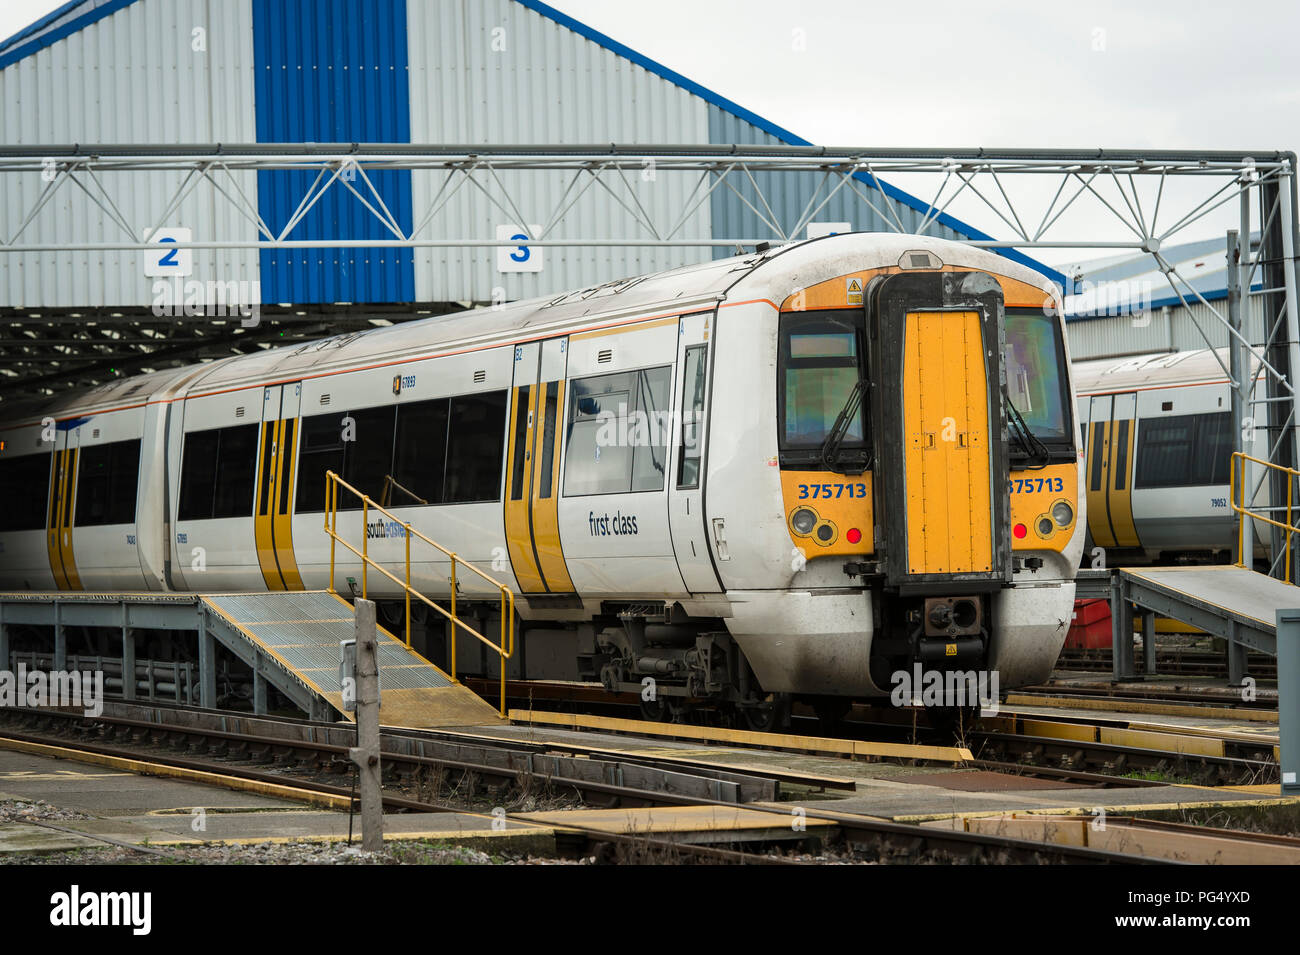 Class 375 passenger train in Southeastern livery in a railway depot in England. Stock Photo